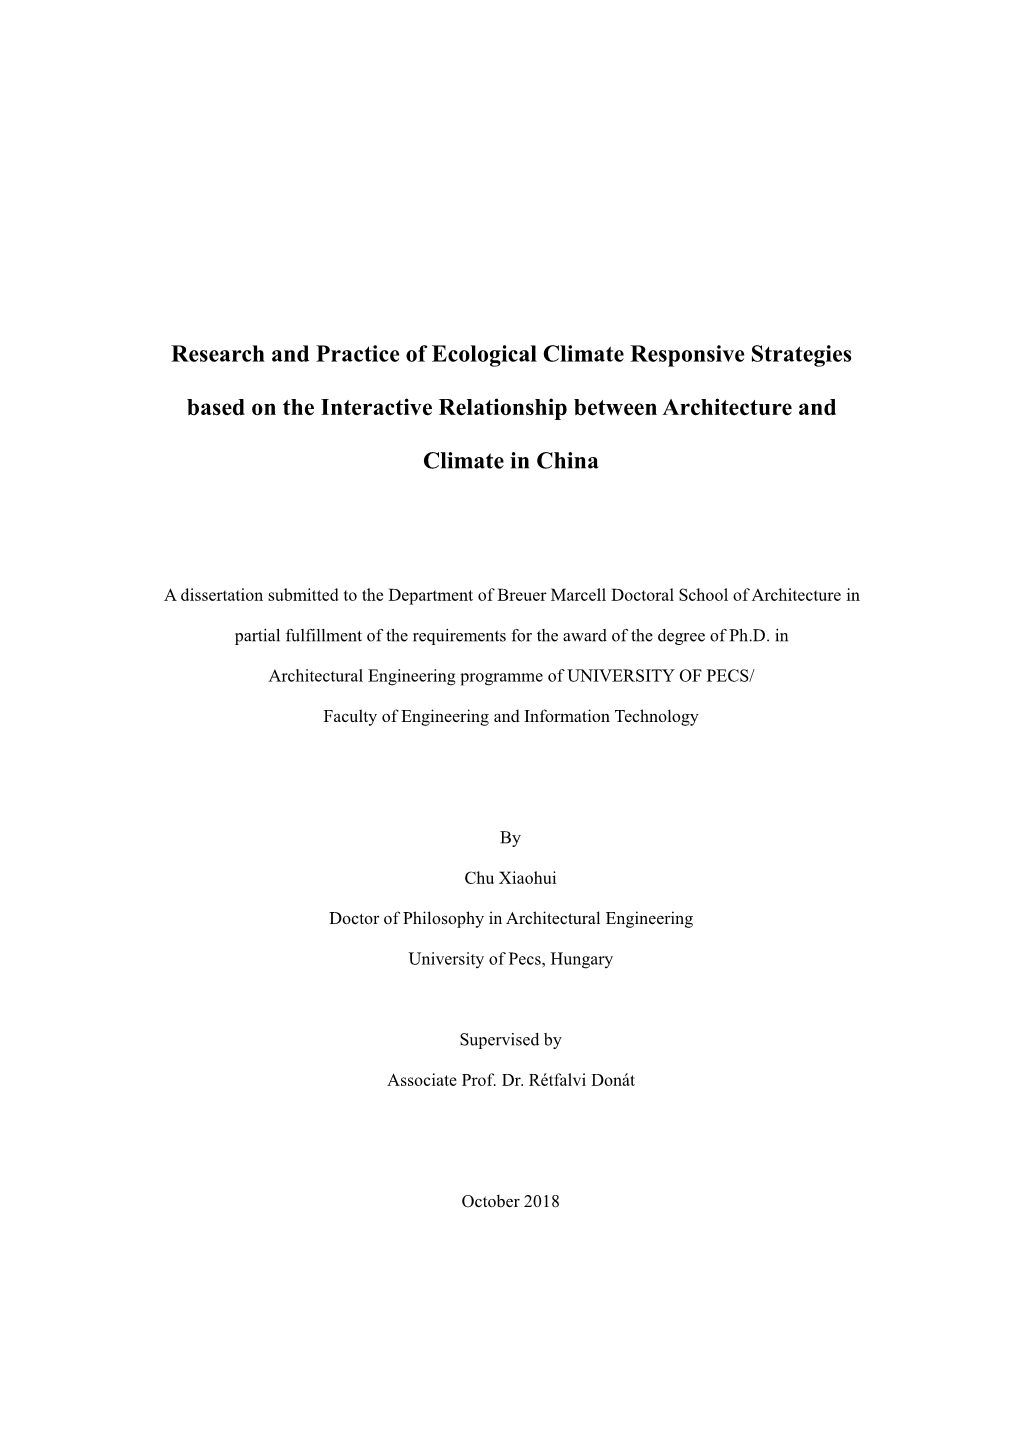 Research and Practice of Ecological Climate Responsive Strategies